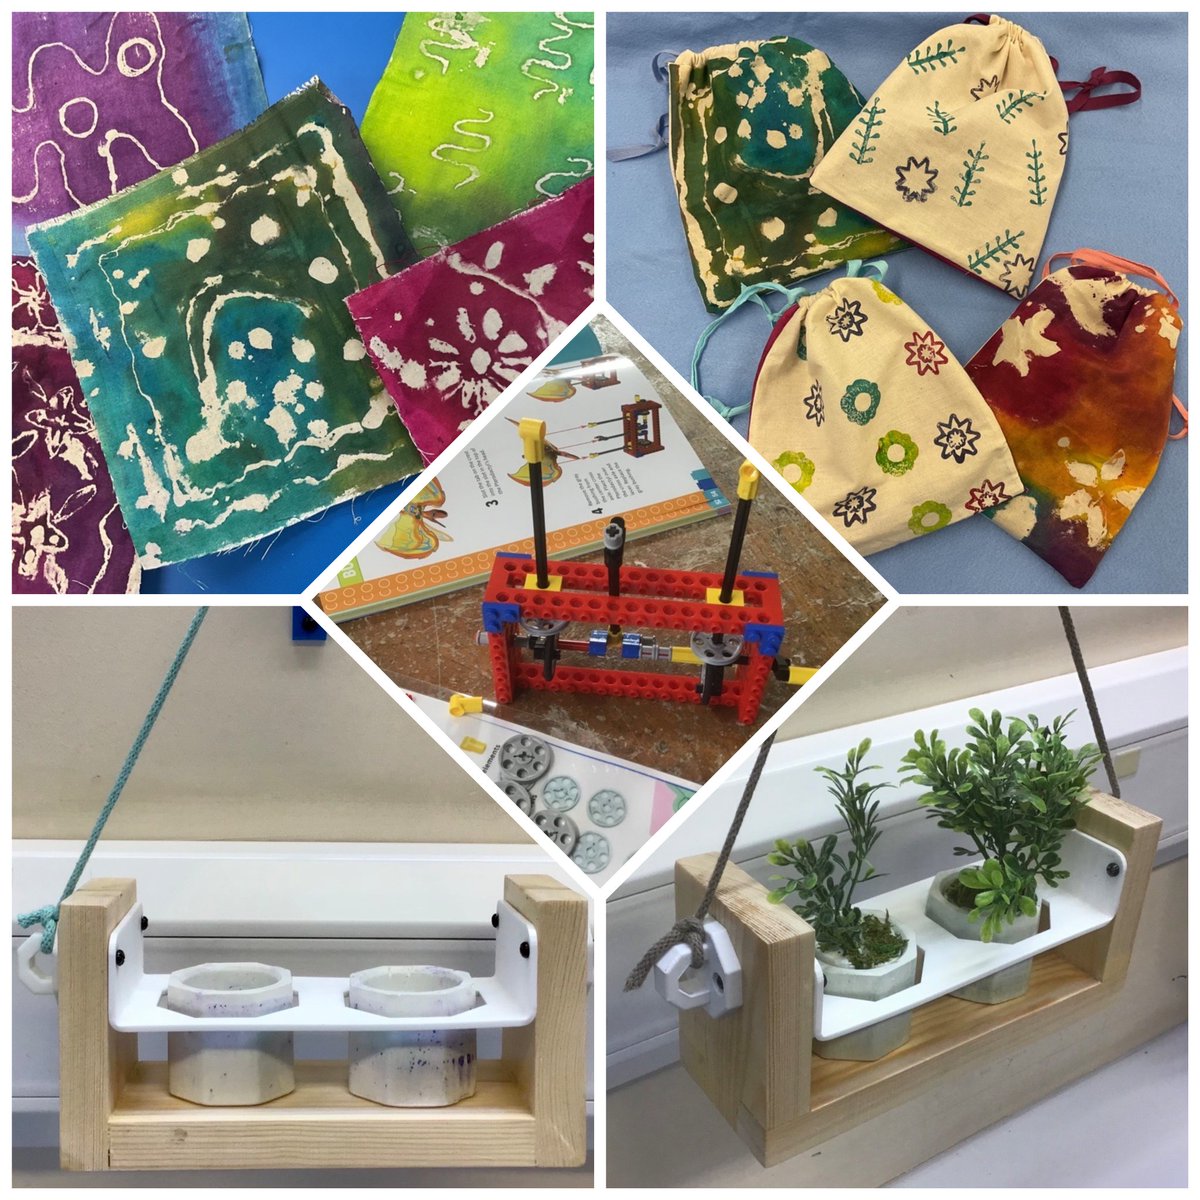 Projects finished in DT by Y8 & Textiles in Y7 this week! #dt #textiles #designtechnology #productdesign